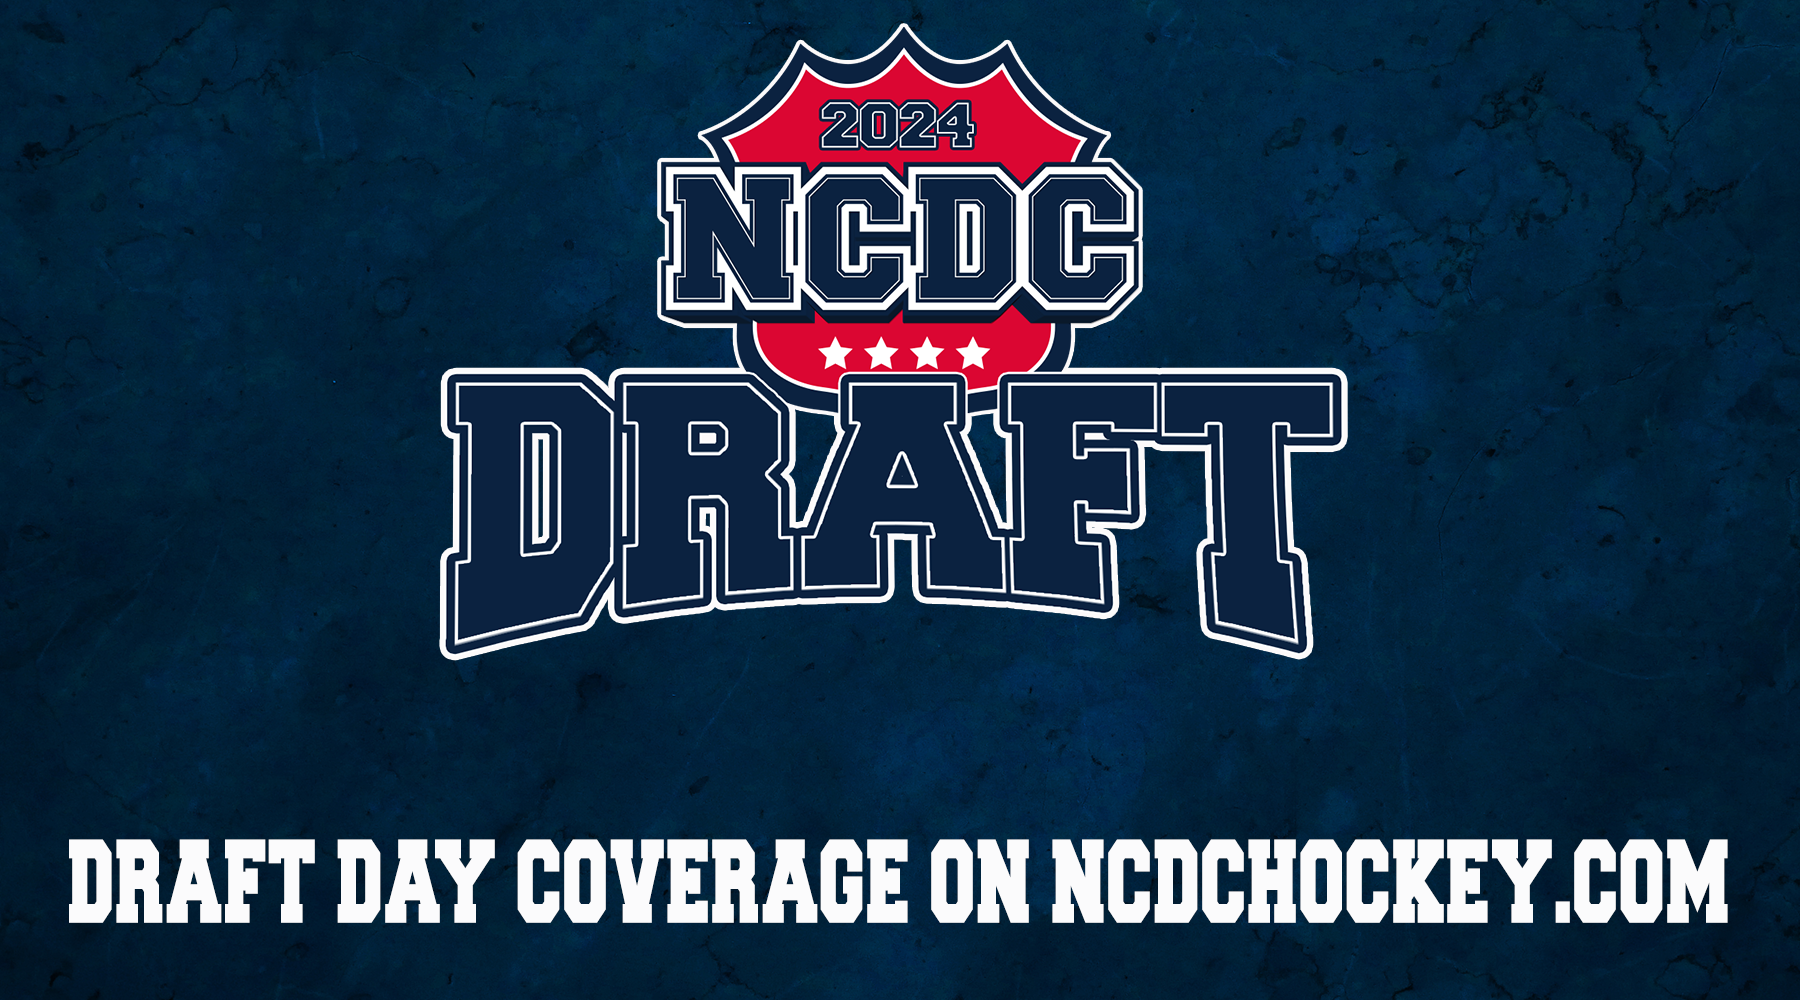 Welcome To Draft Day Coverage On NCDCHockey.com